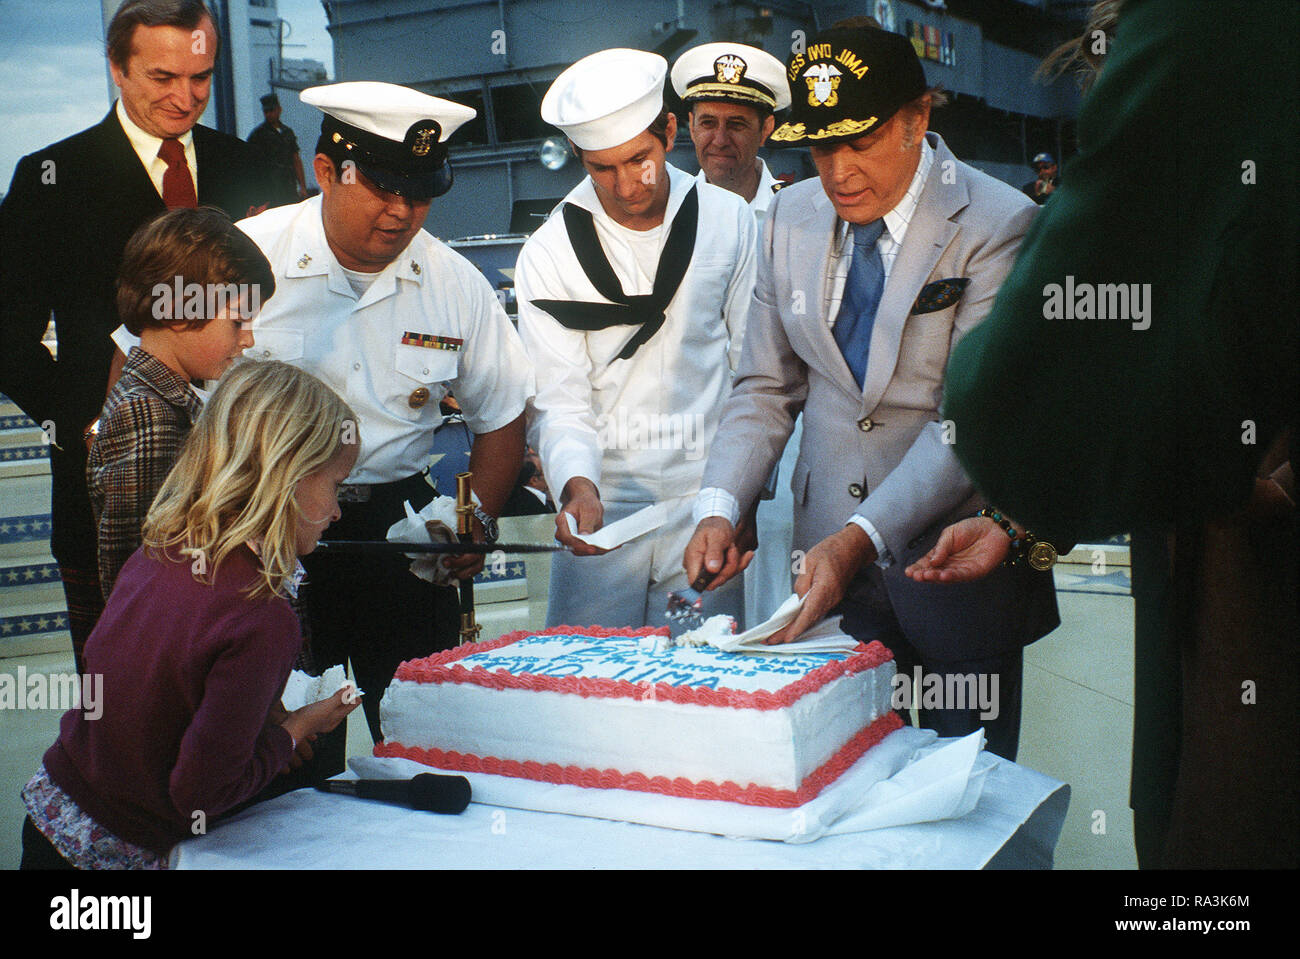 1979 - After the Bob Hope show aboard the amphibious assault ship USS IWO JIMA (LPH-2), Bob Hope is honored with a cake for his 76th birthday. Stock Photo